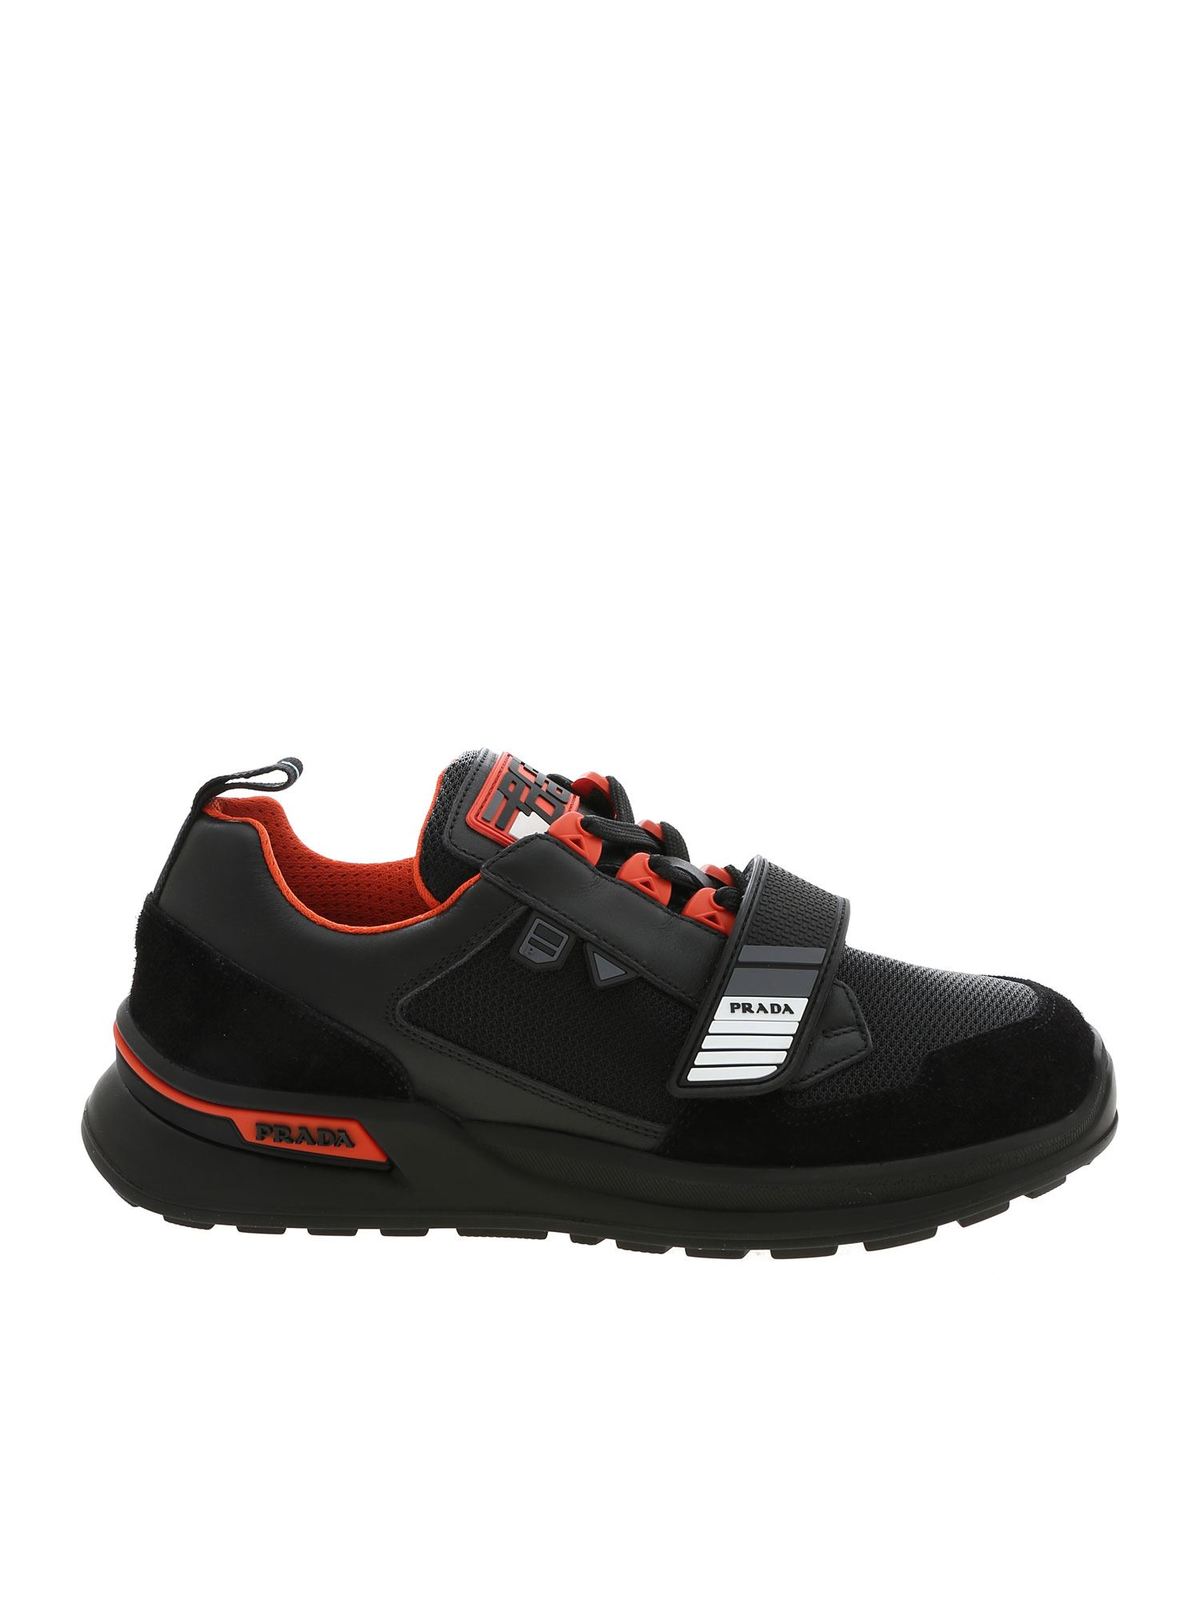 PRADA MECHANO SNEAKERS IN BLACK LEATHER AND FABRIC